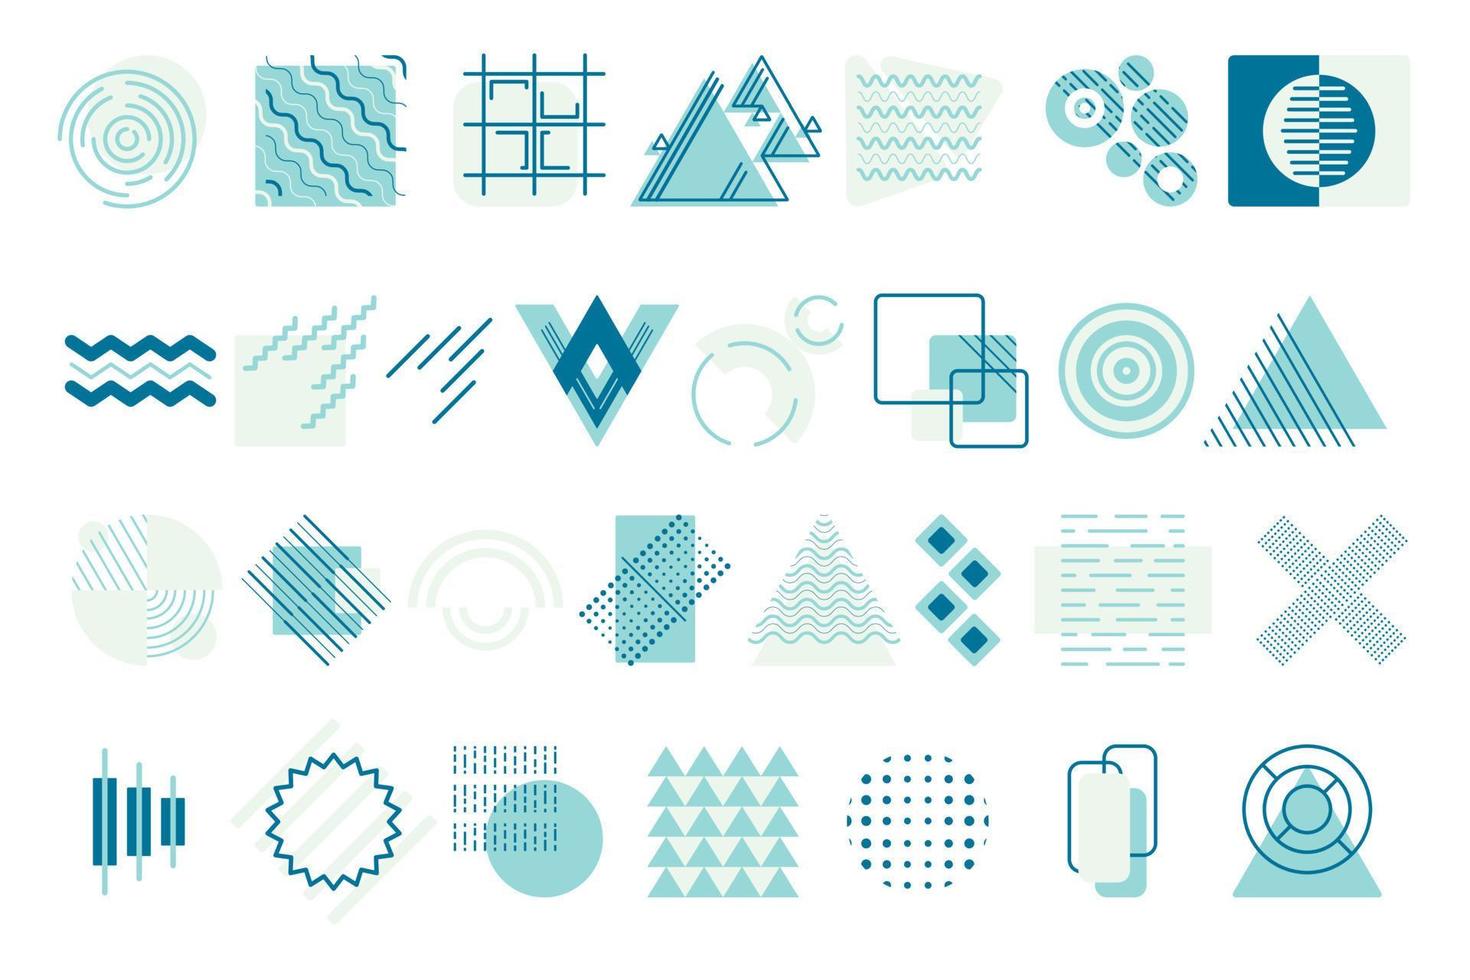 Large isolated vector geometric shapes. Various round, square and triangular abstract forms. Elements of zigzags, lines and dots for the background.